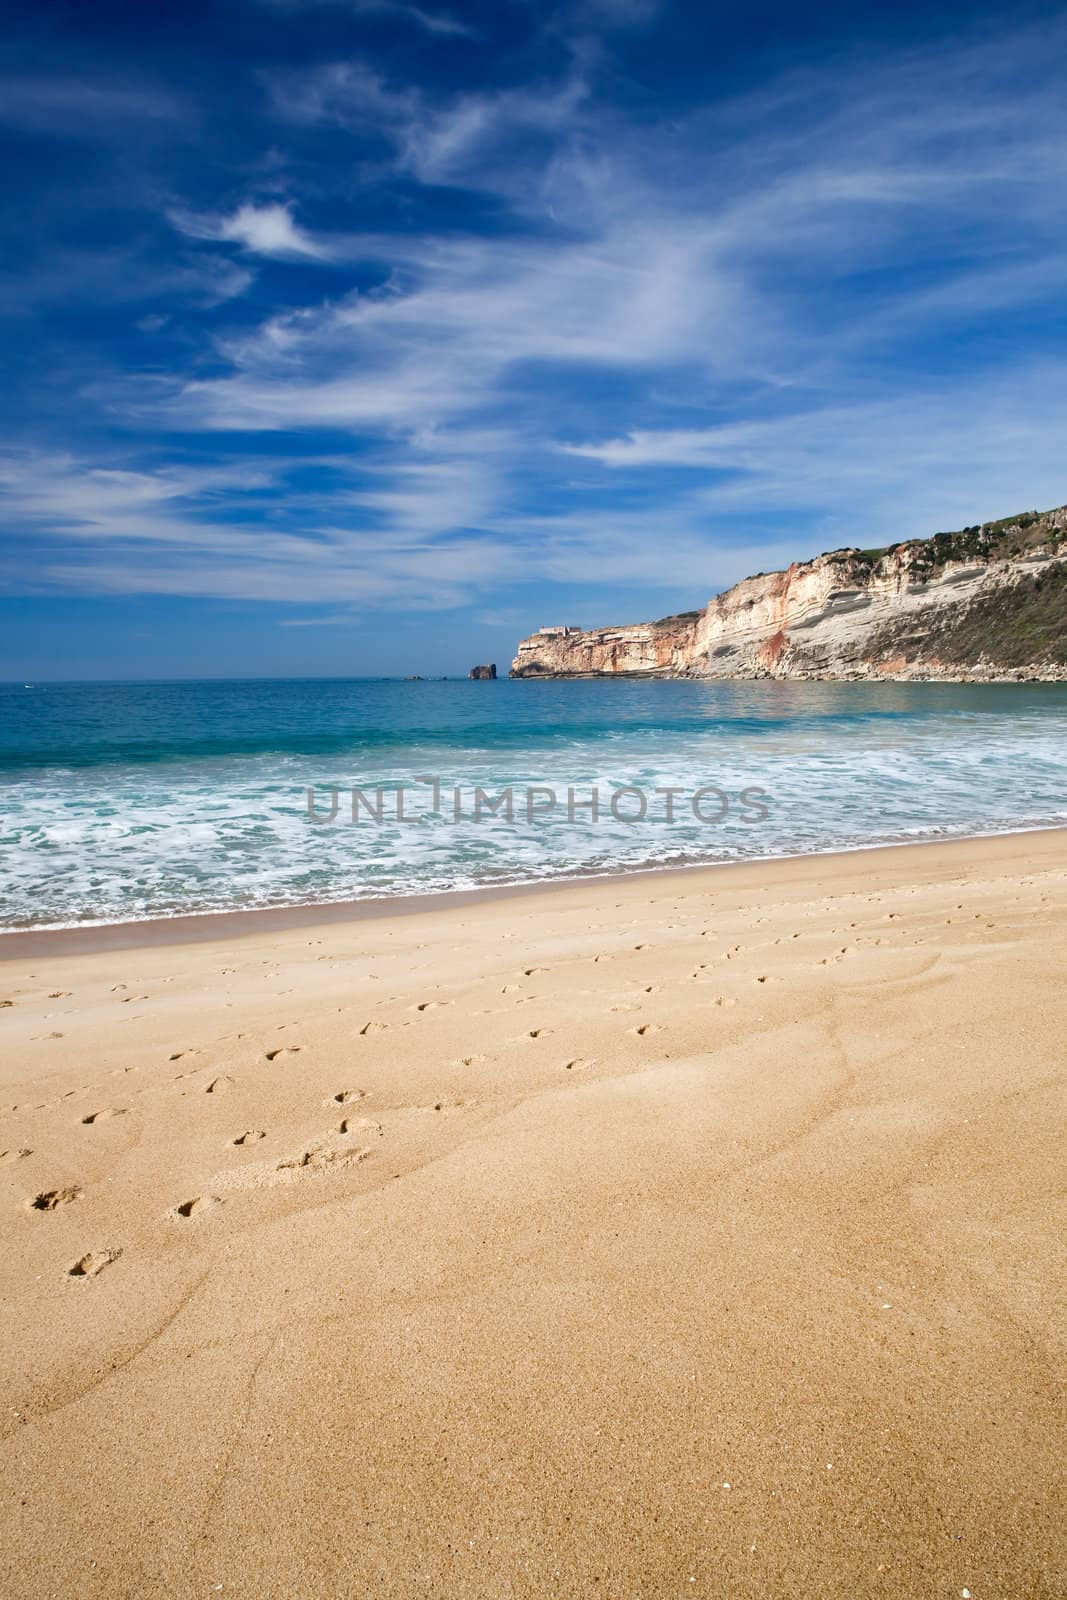 Landscape picture of the beautiful beach from Nazare, Portugal